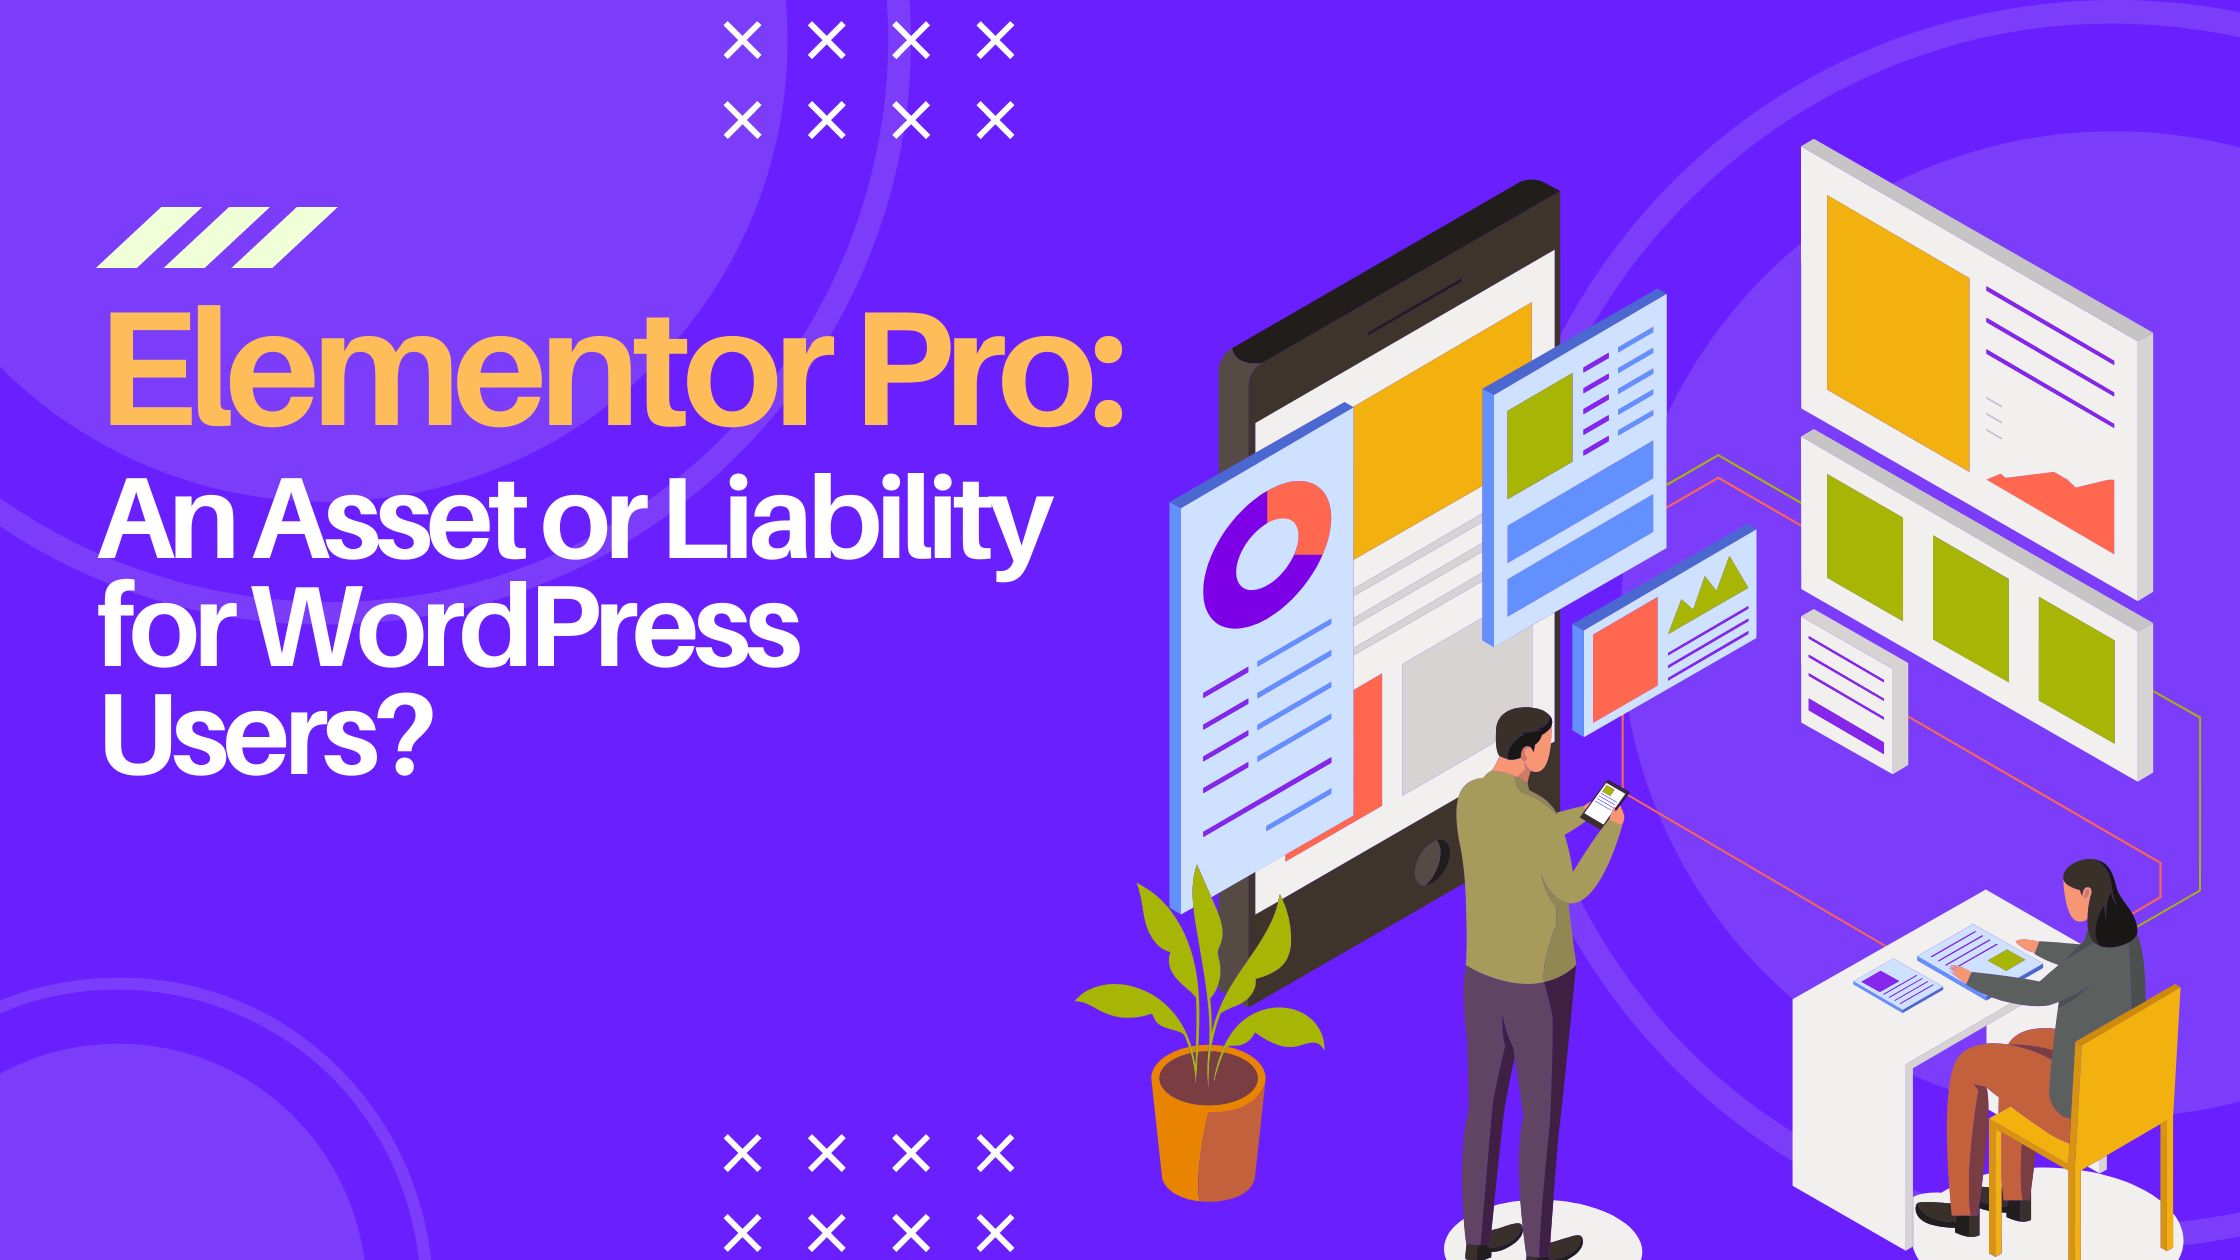 Elementor Pro: An Asset or Liability for WordPress Users?